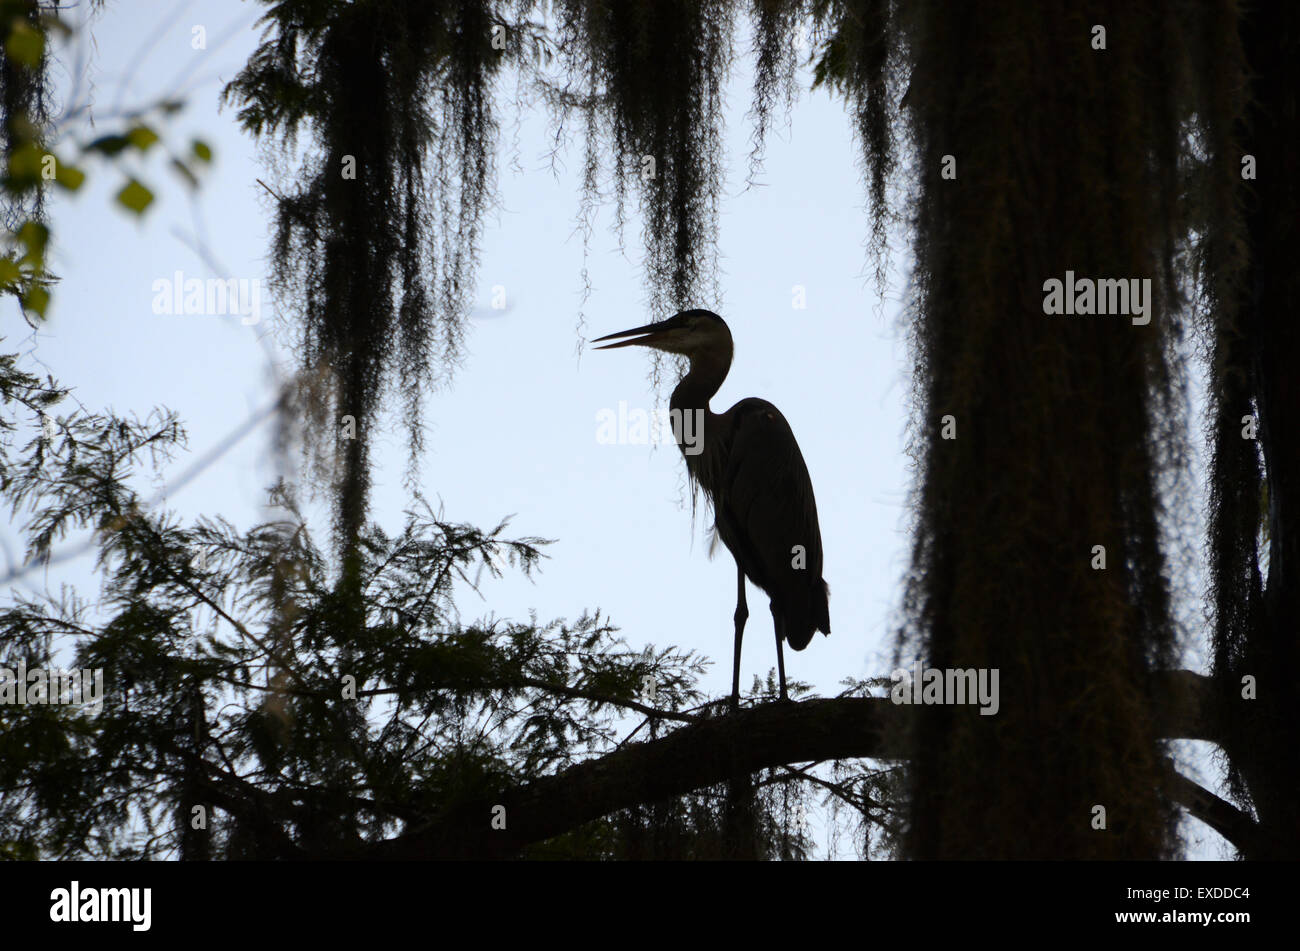 Cicogna Louisiana Swamp Pearl River bayou new orleans Foto Stock